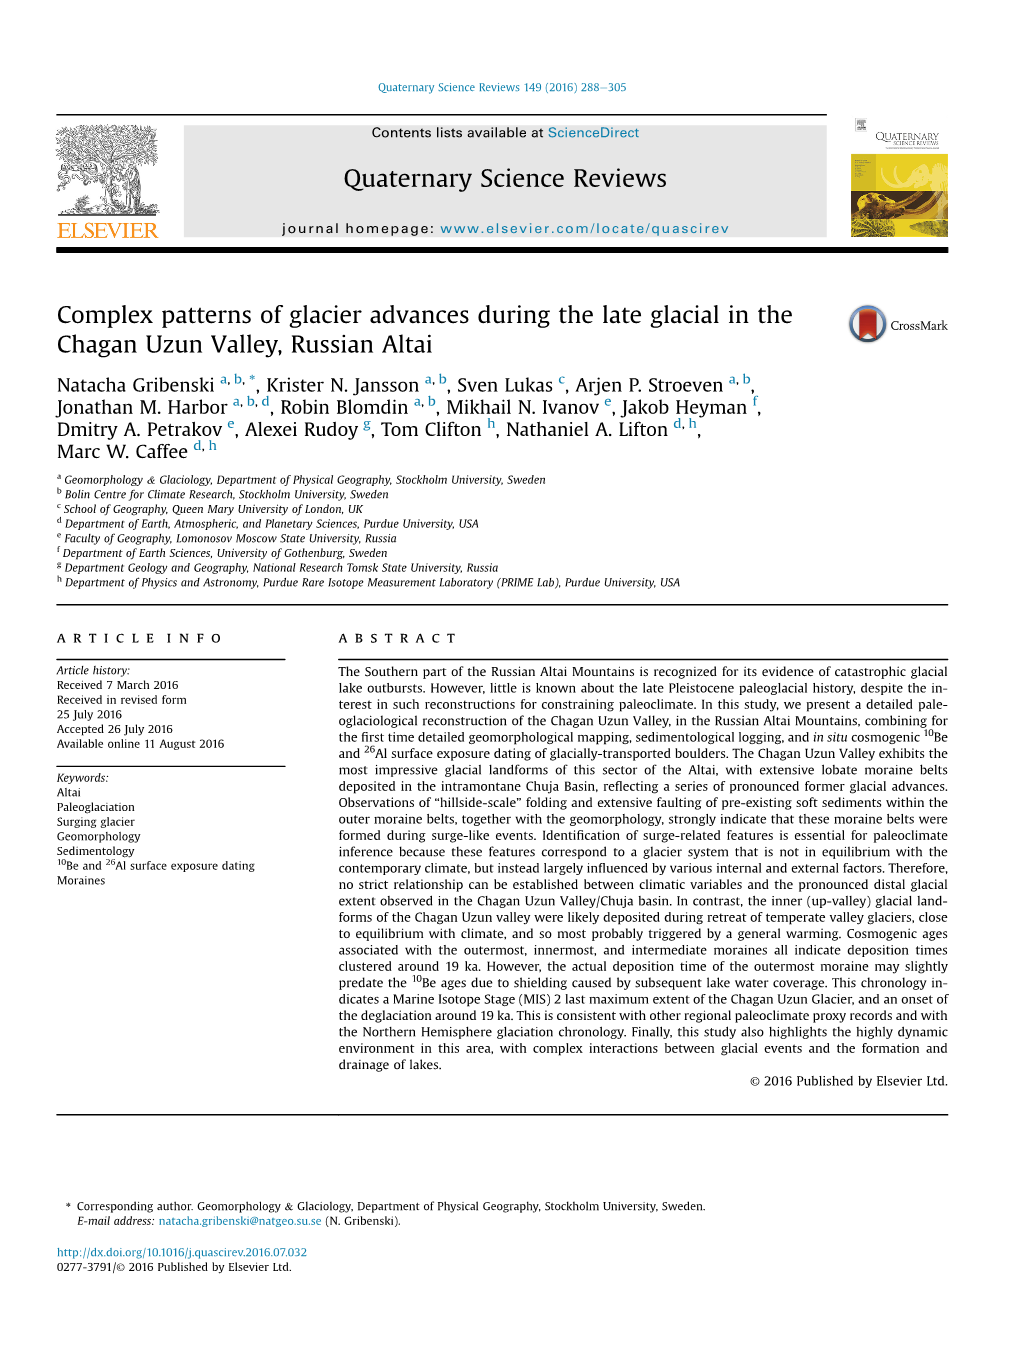 Complex Patterns of Glacier Advances During the Late Glacial in the Chagan Uzun Valley, Russian Altai